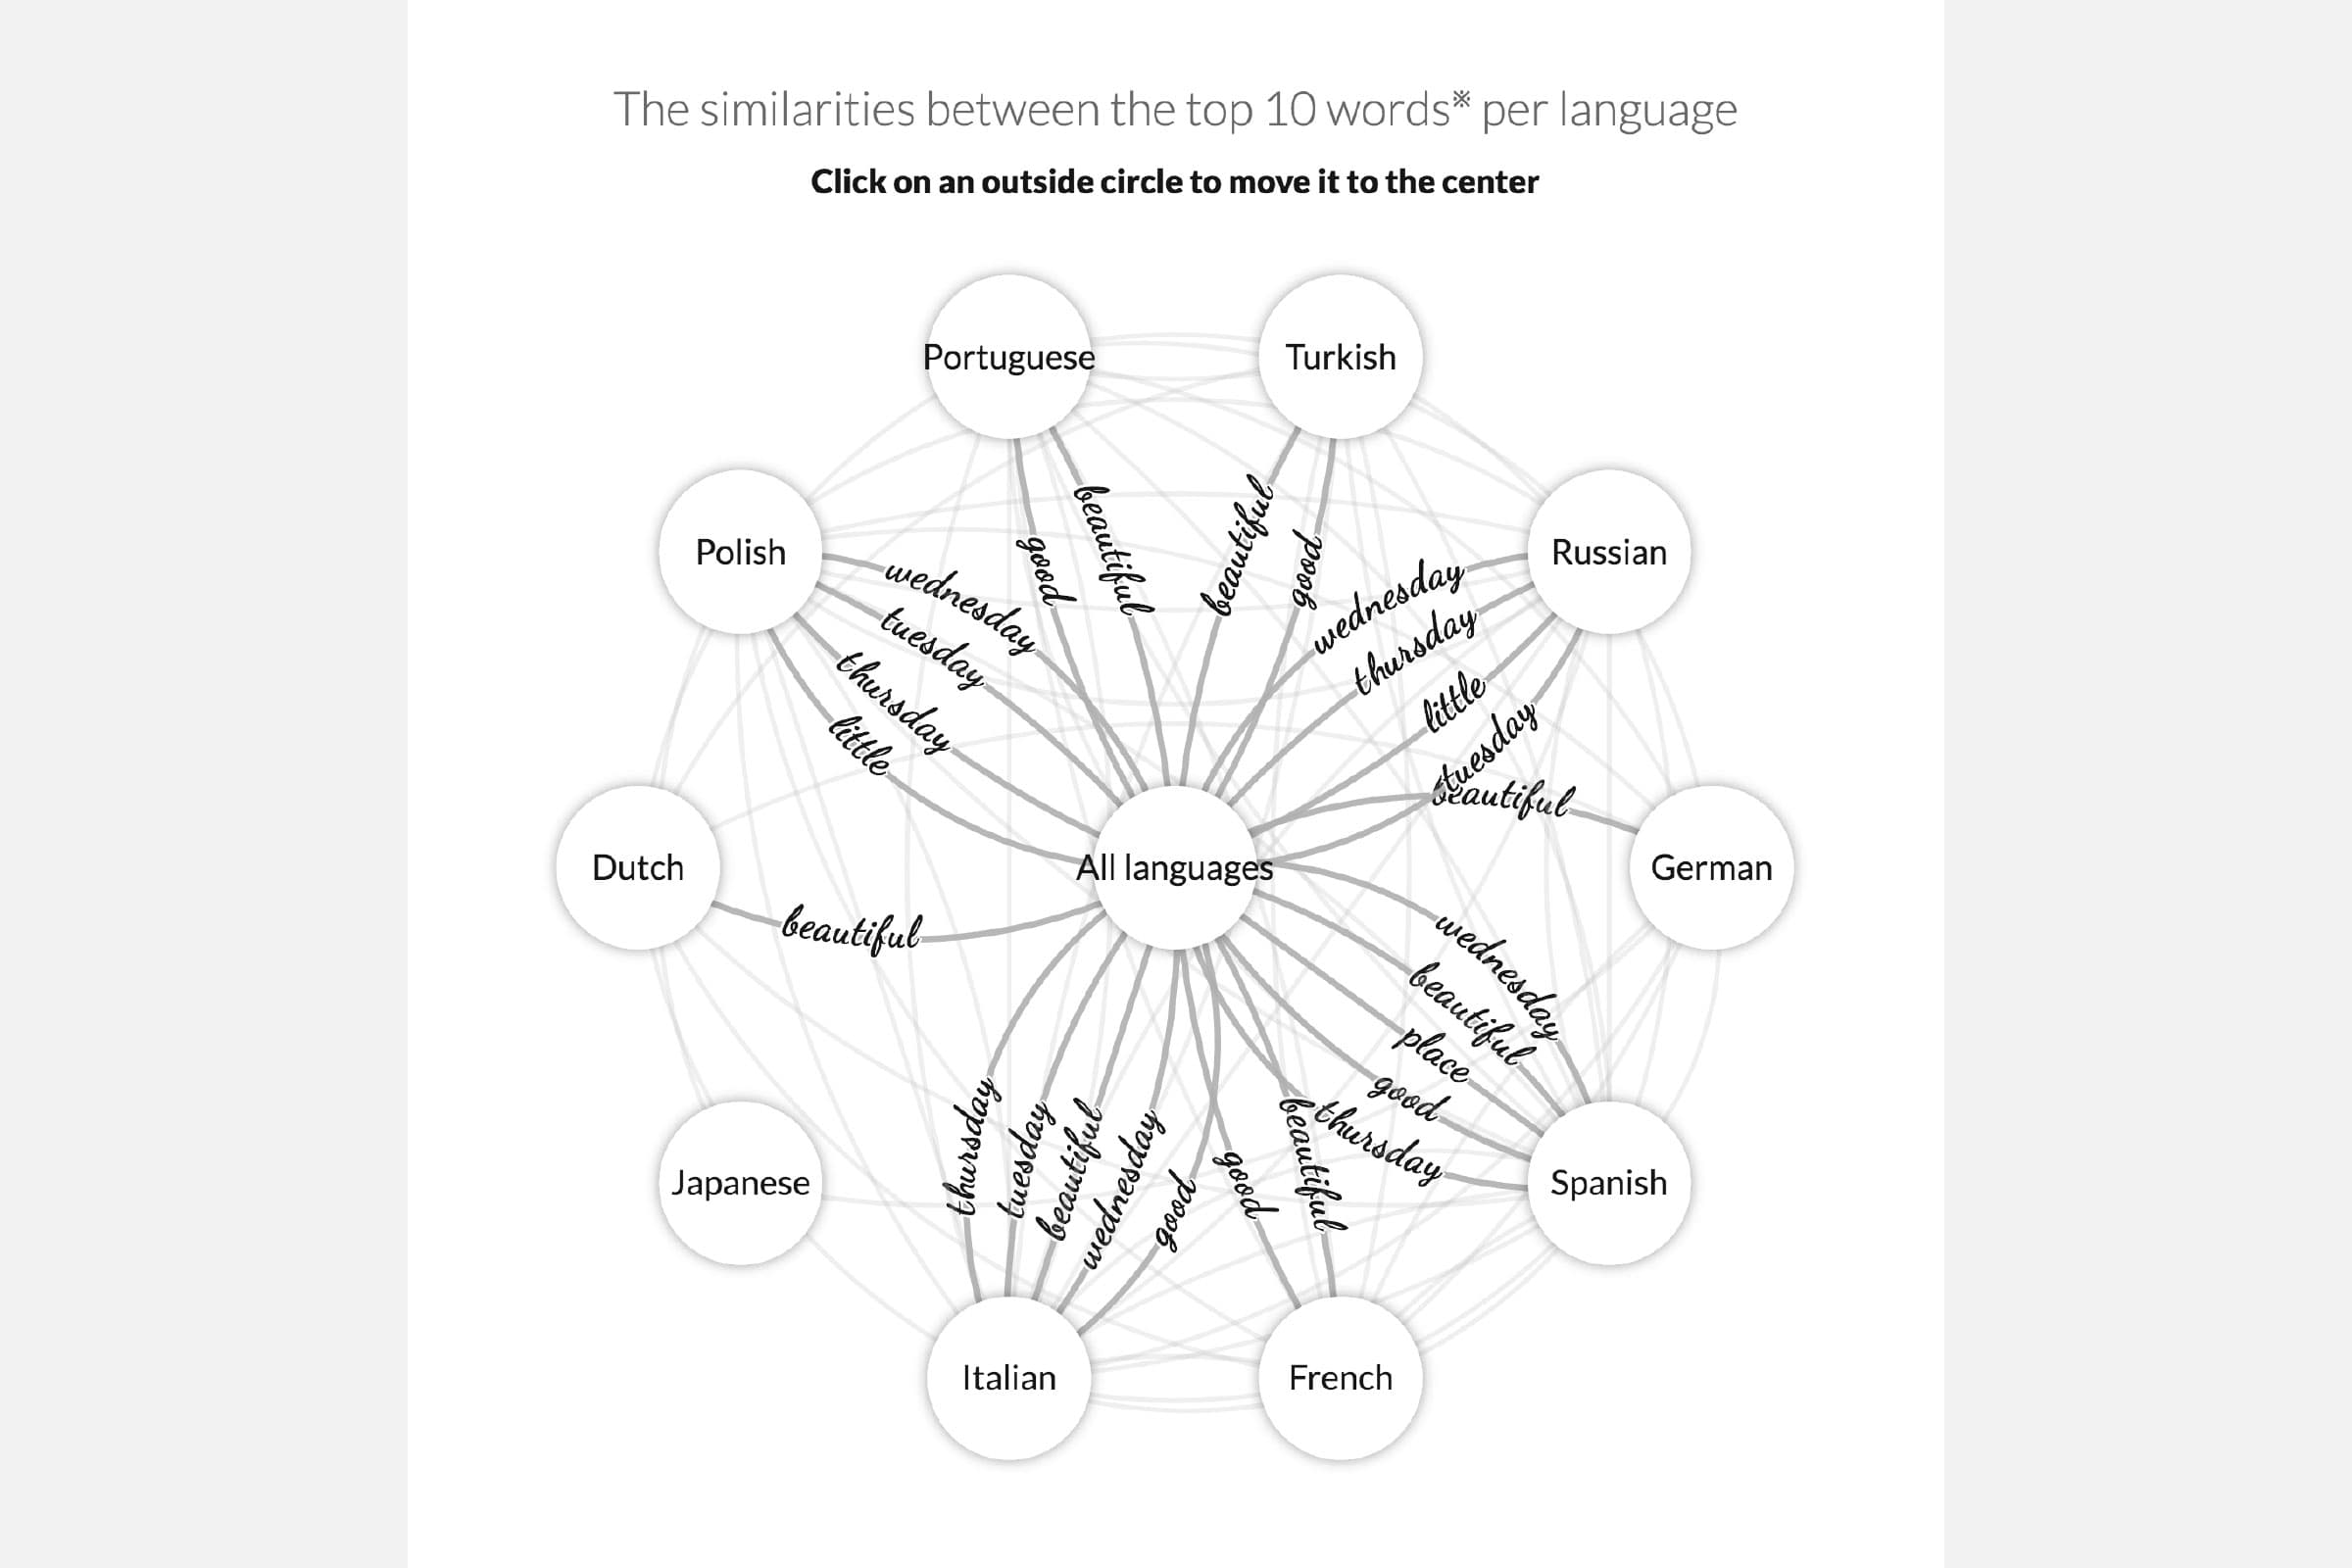 The last section dives into the similarities between languages